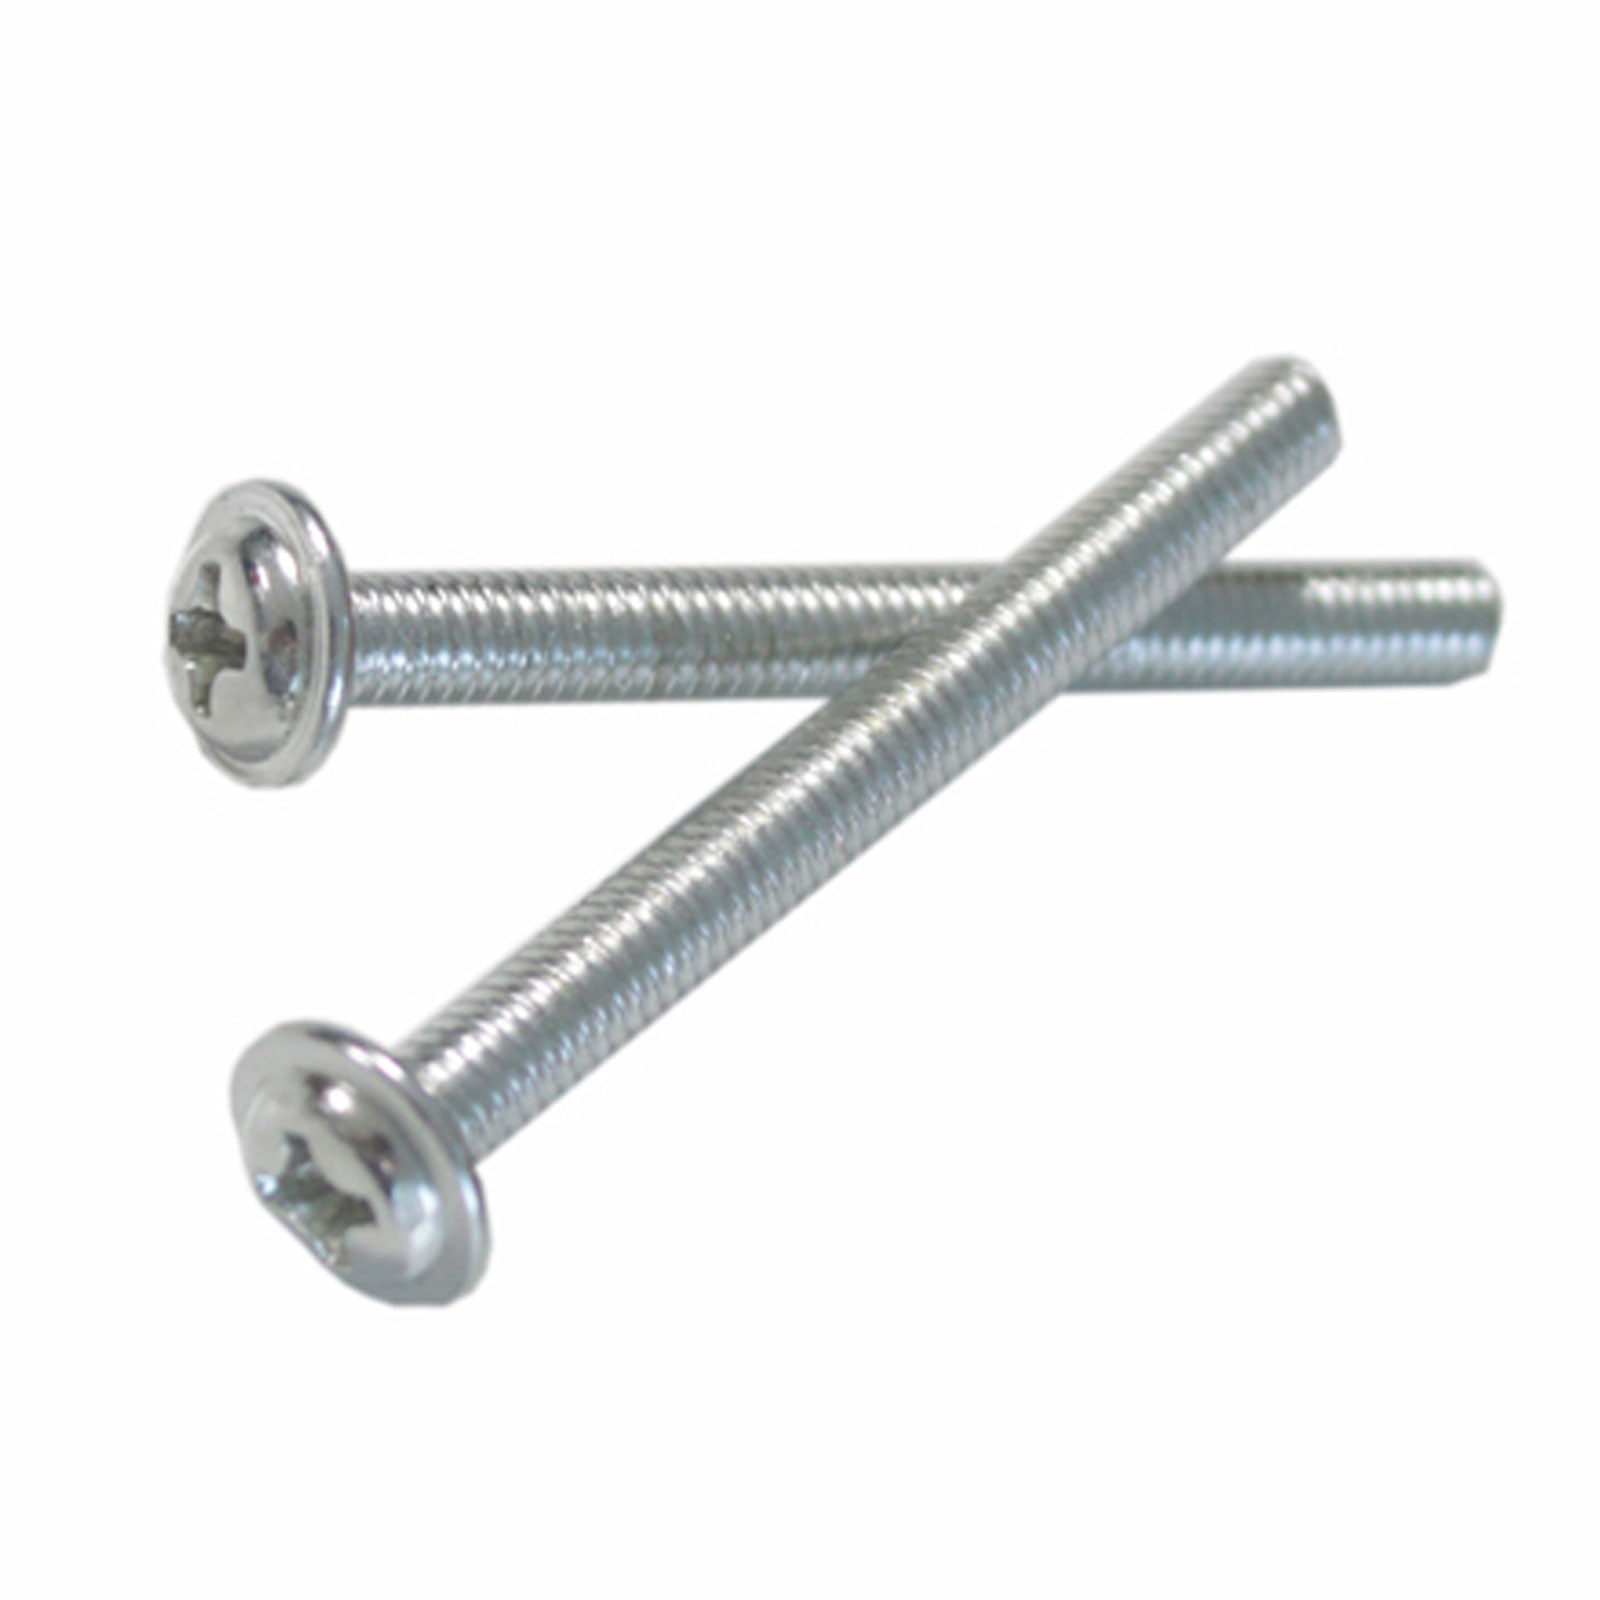 Stainless Steel Mounting Screws For Cabinets Machined Cupboard